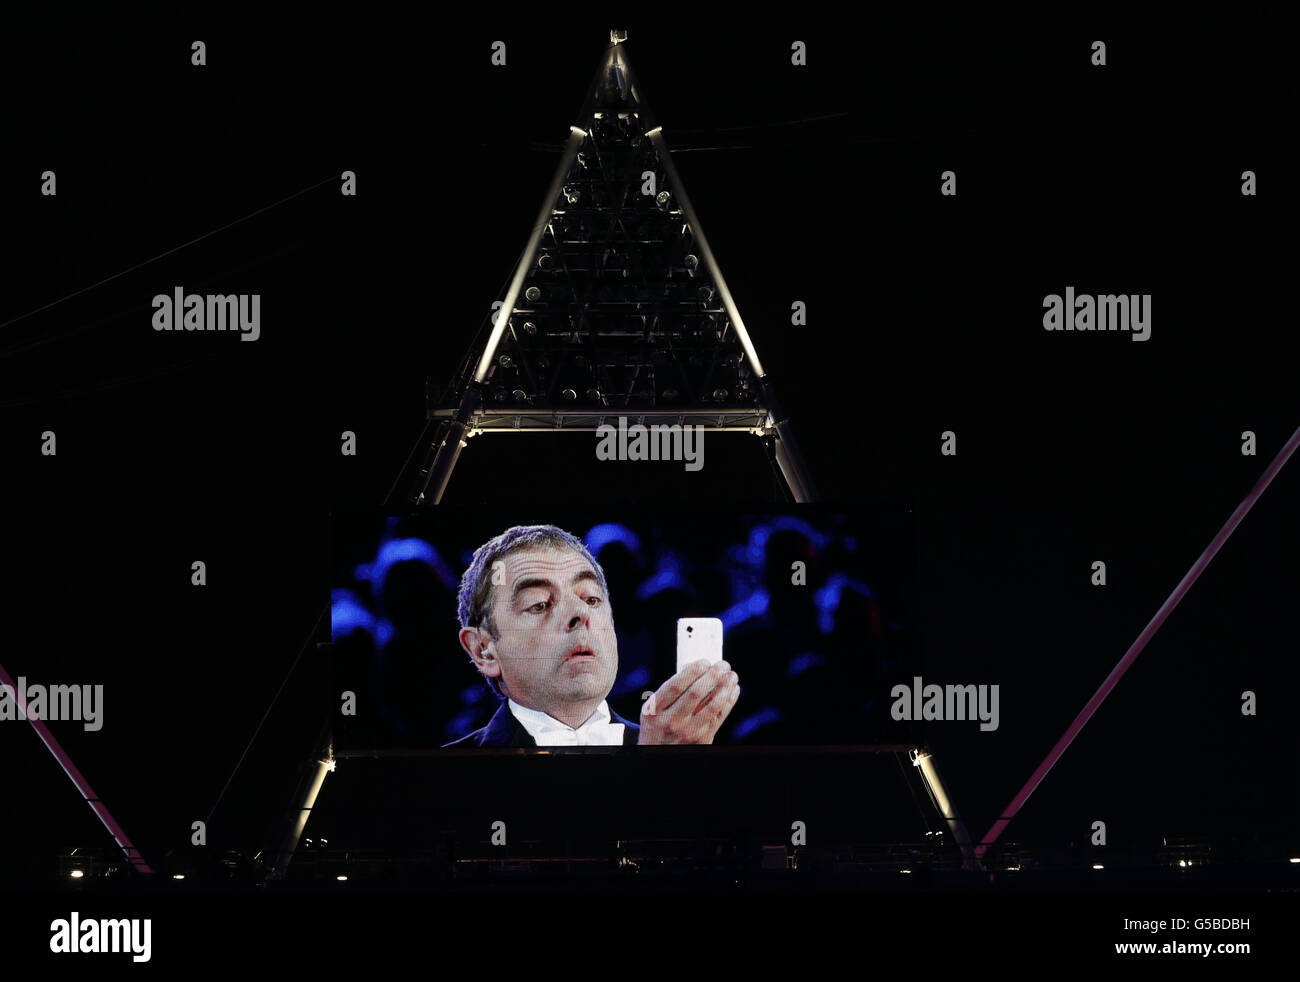 Actor Rowan Atkinson plays Mr Bean on stage of the London Olympic Games 2012 Opening Ceremony at the Olympic Stadium, London. Stock Photo